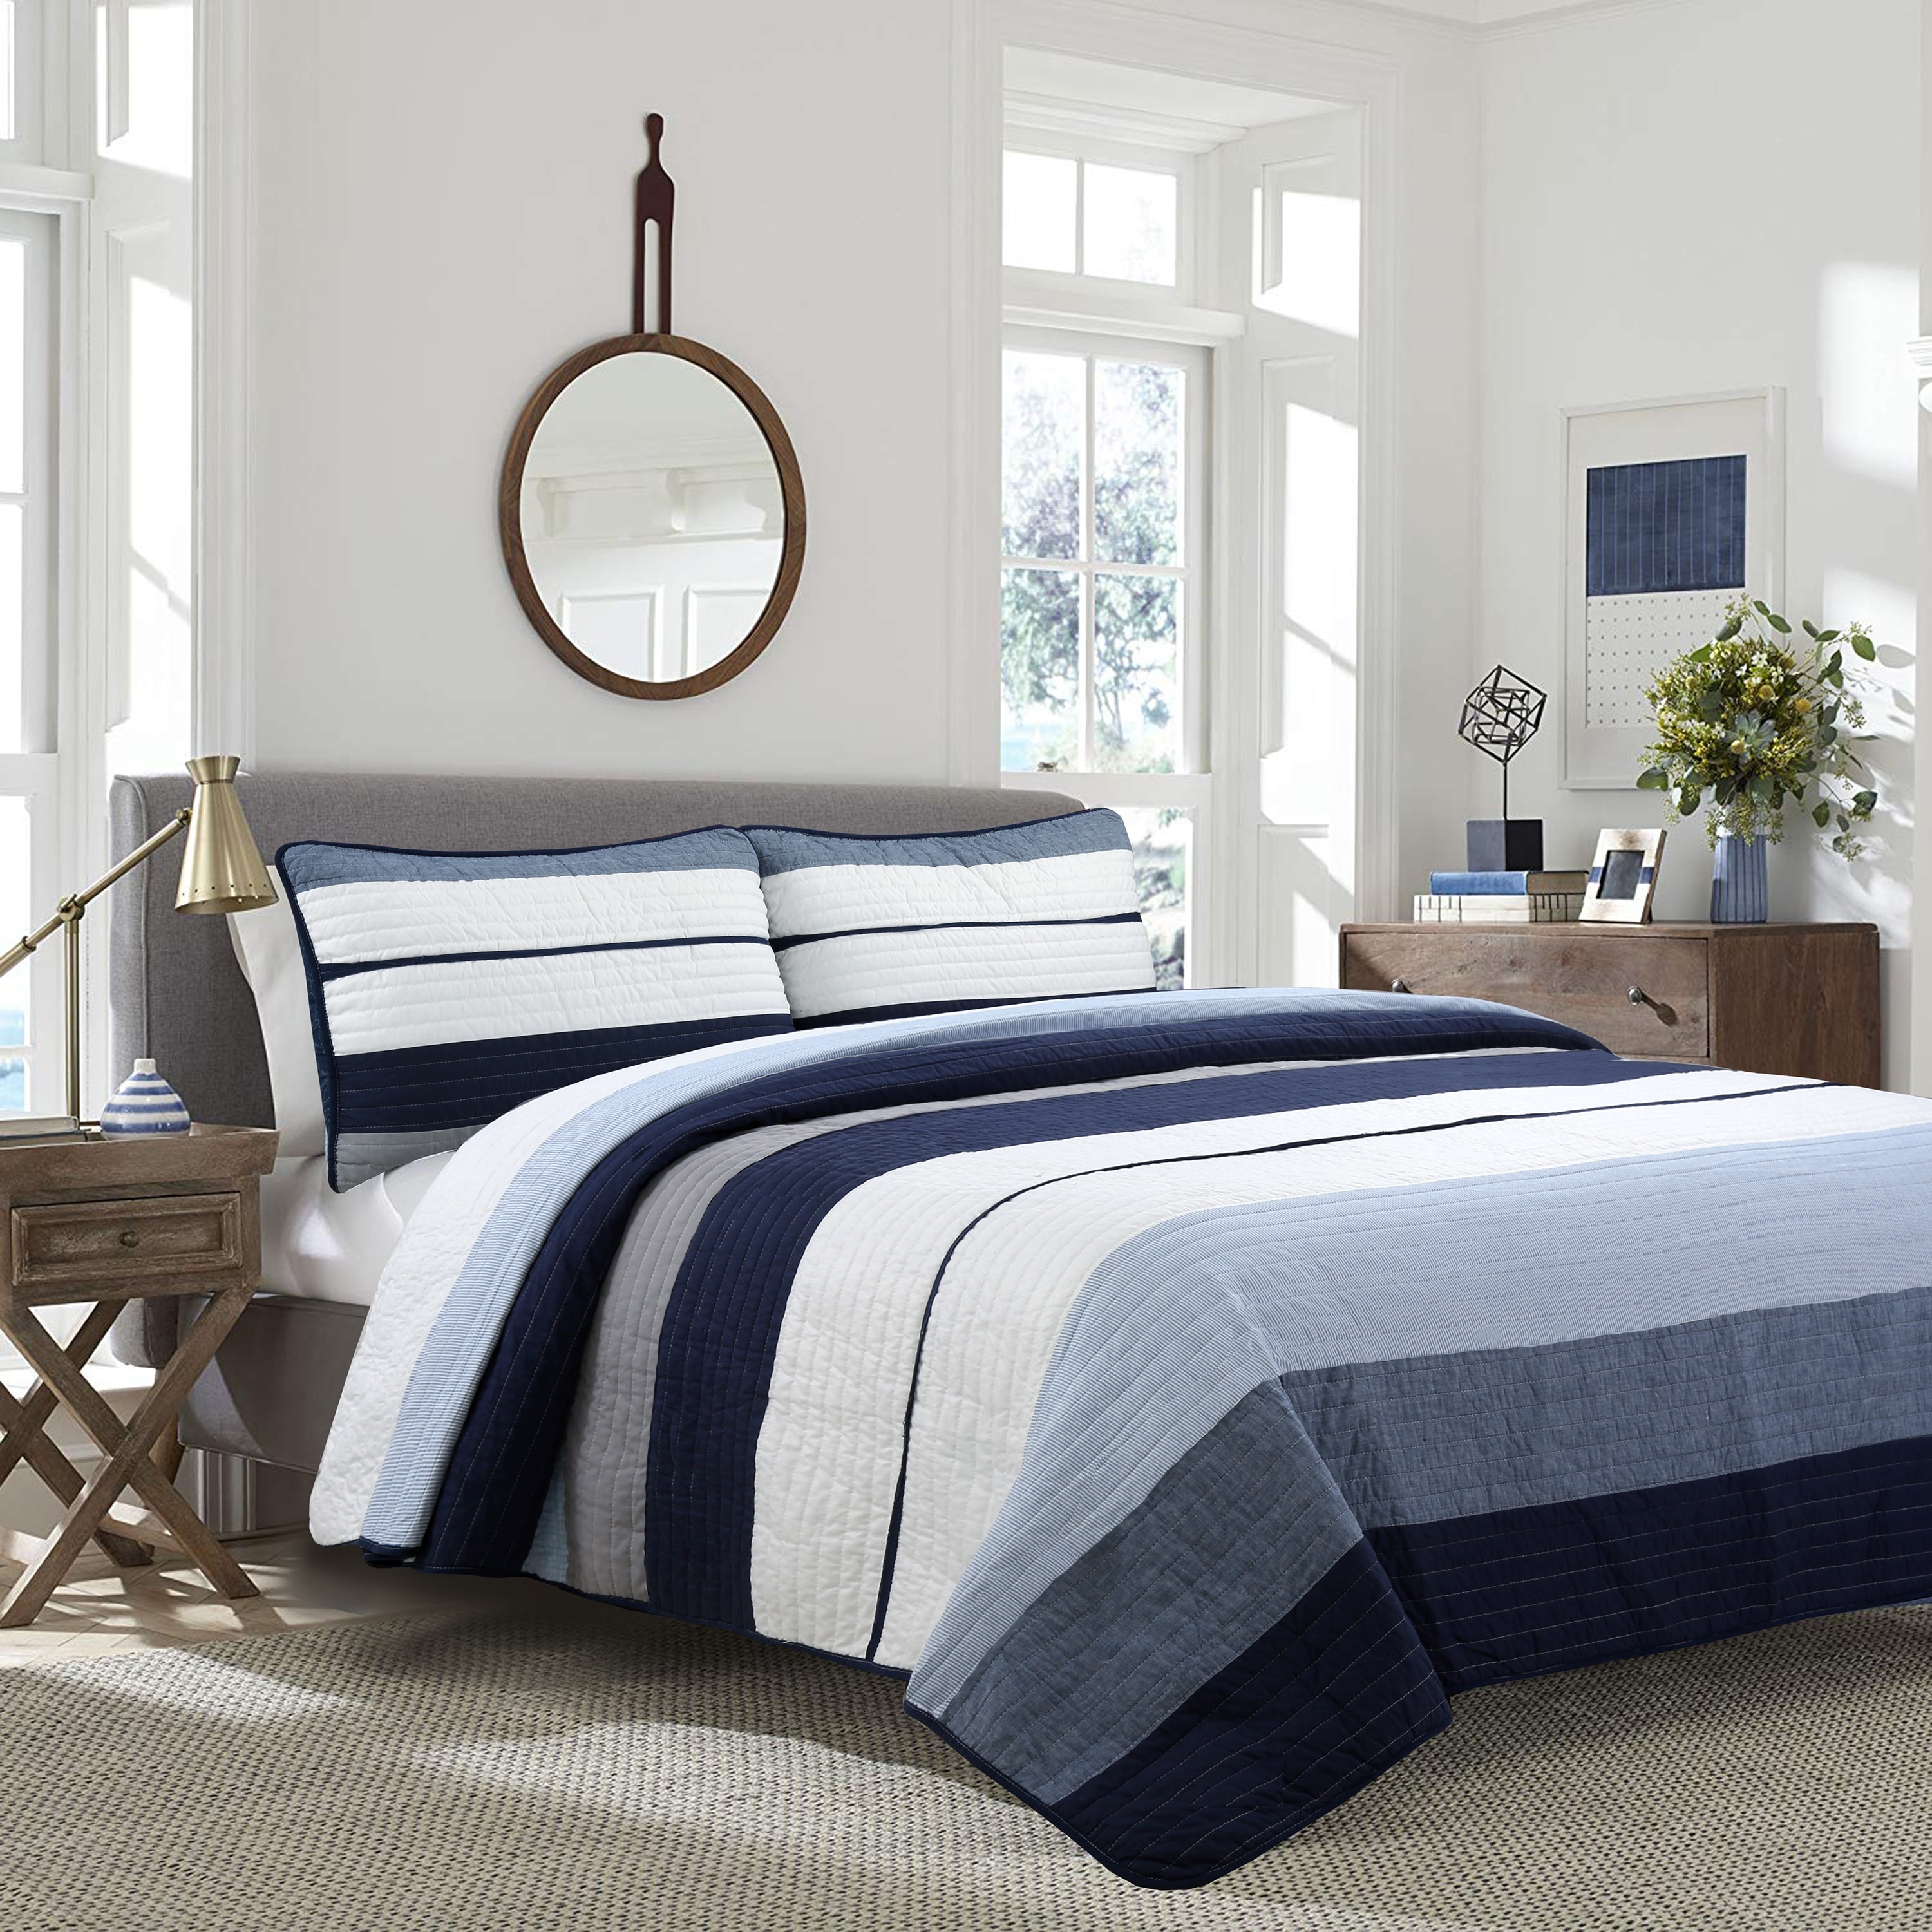 Queen Size Designer Quilts and Bedspreads - Bed Bath & Beyond